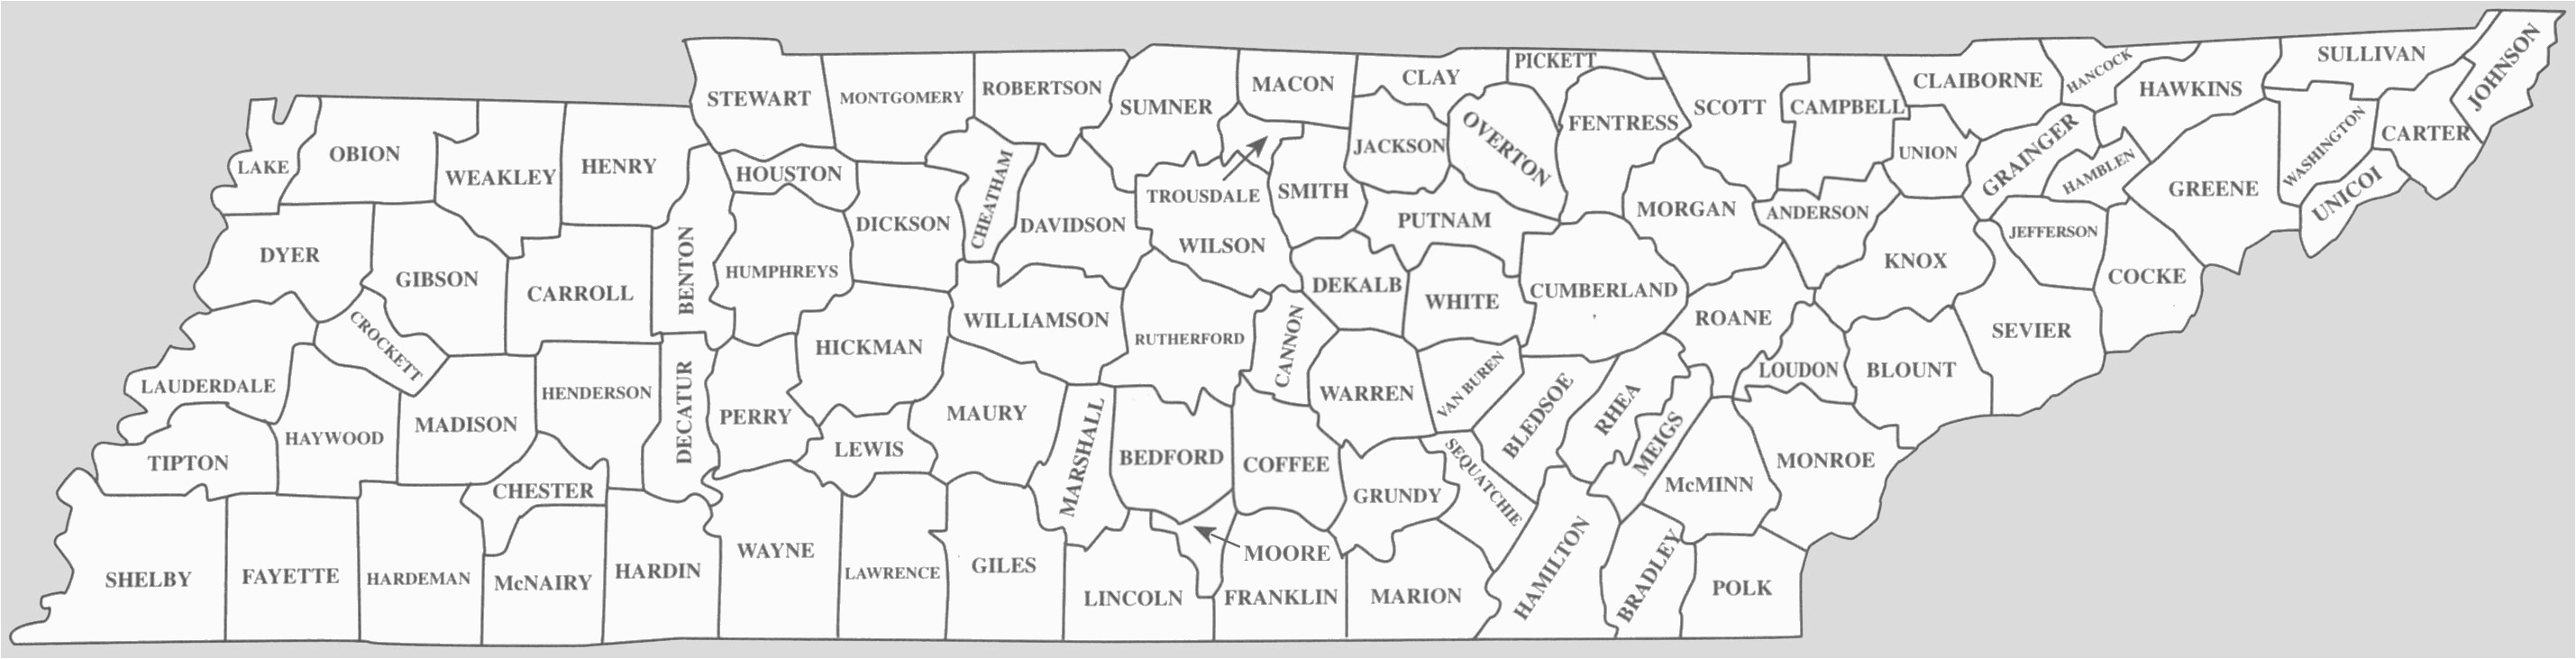 printable-tennessee-county-map